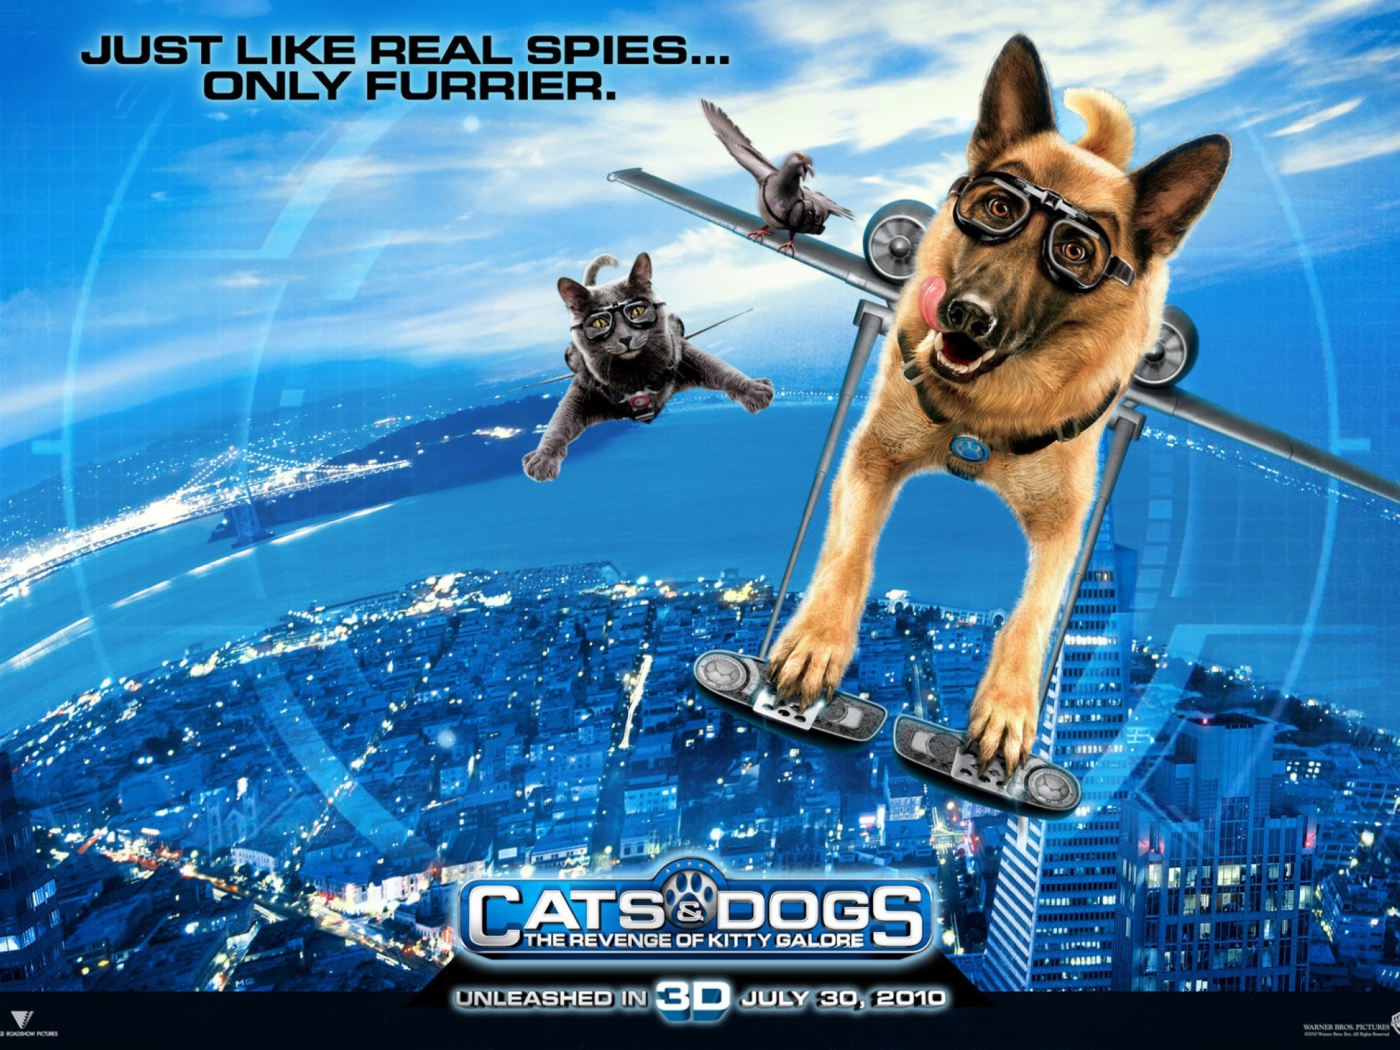 Cats & Dogs: The Revenge of Kitty Galore wallpaper 1400x1050